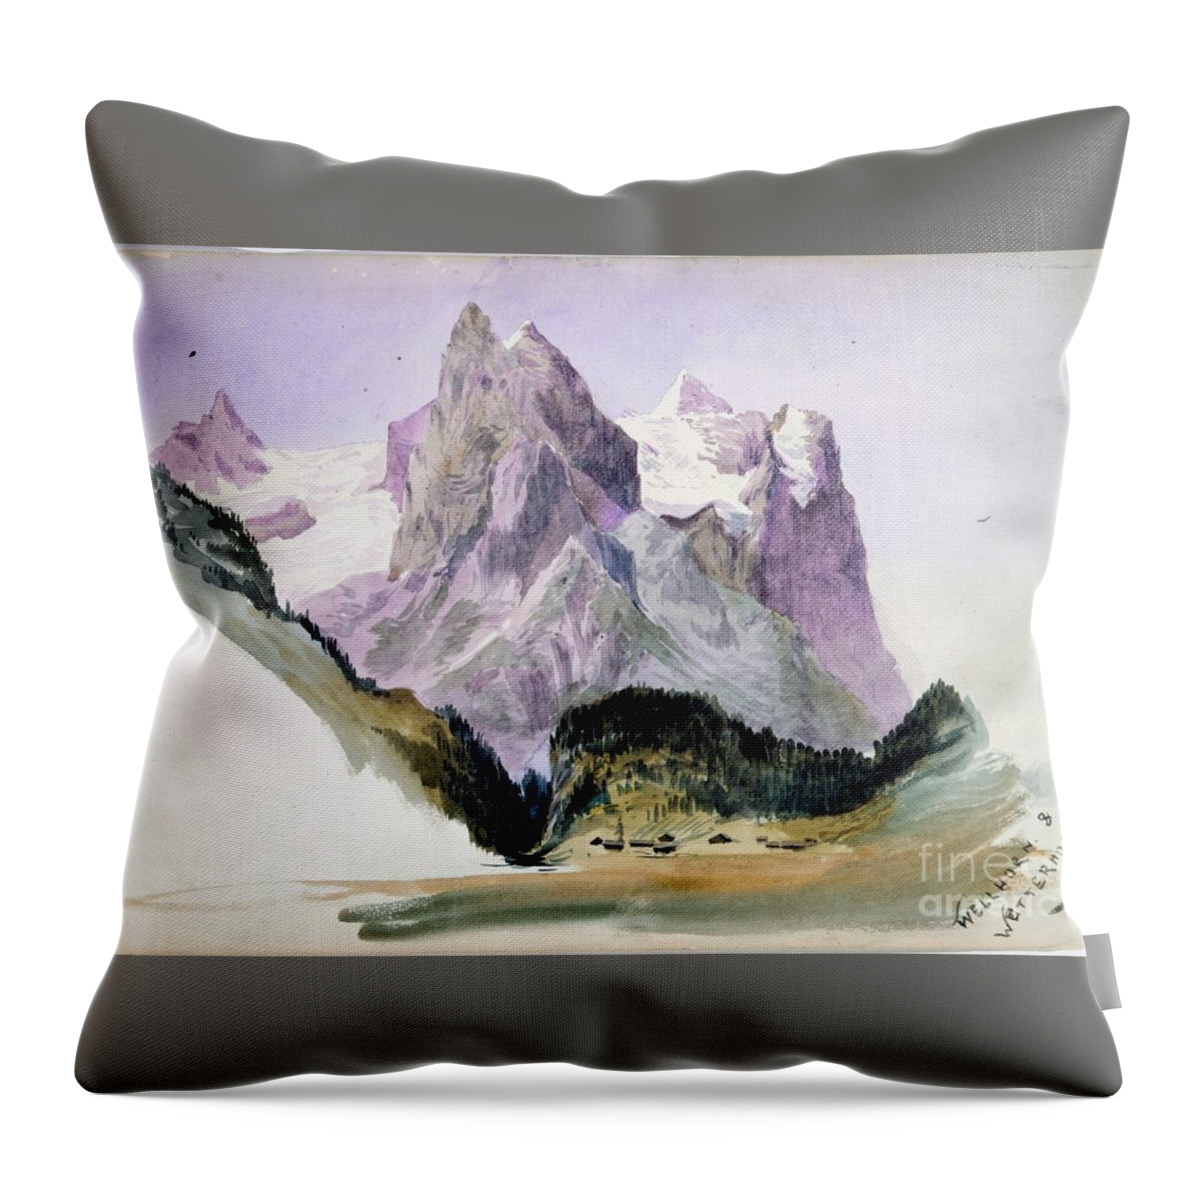 19th Century Throw Pillow featuring the painting Wellhorn and Wetterhorn by John Singer Sargent